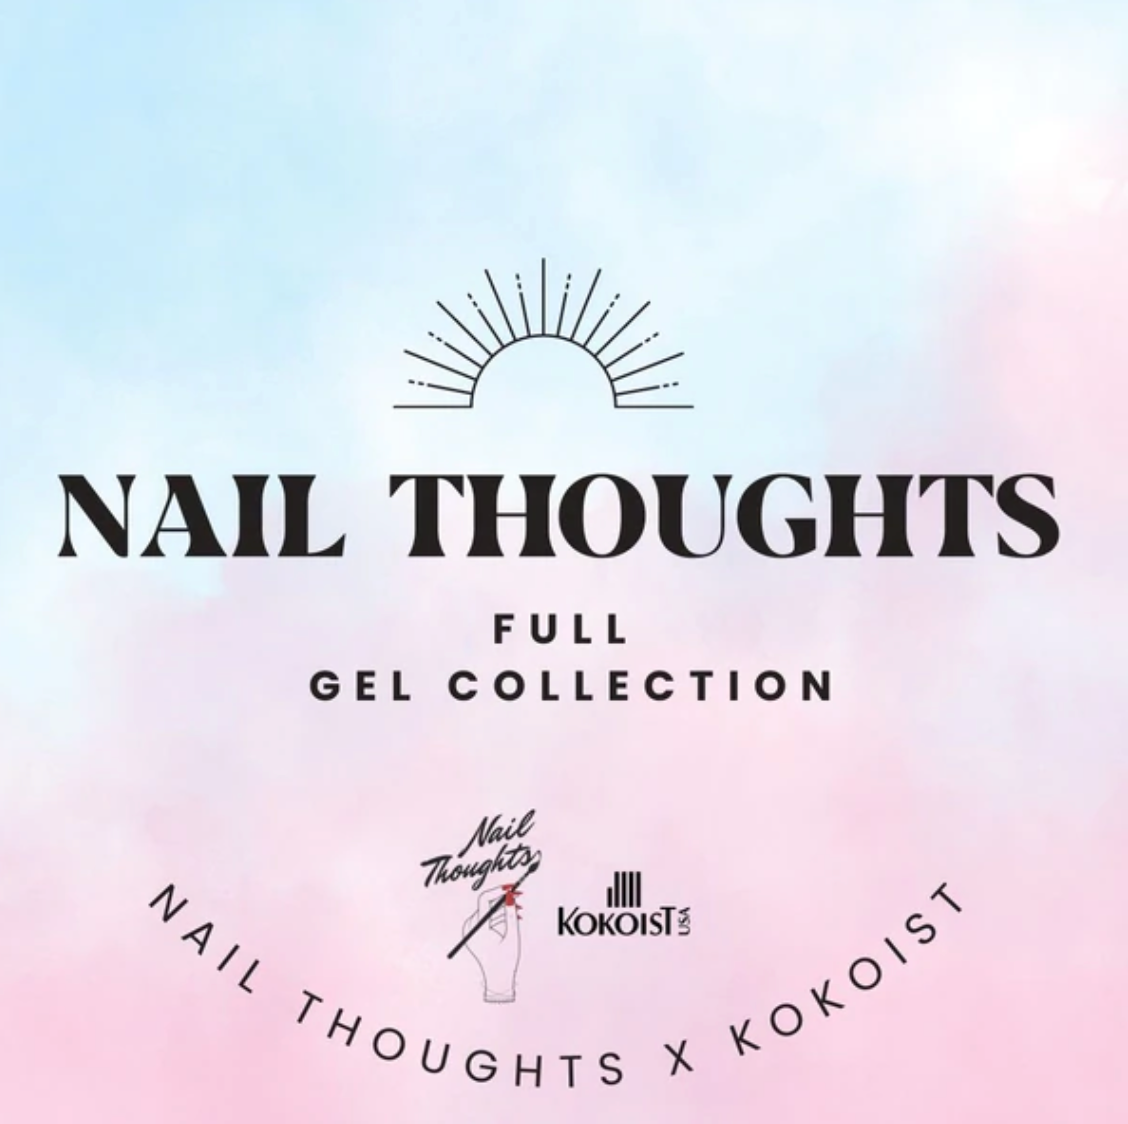 Nail Thoughts Full Gel Collection